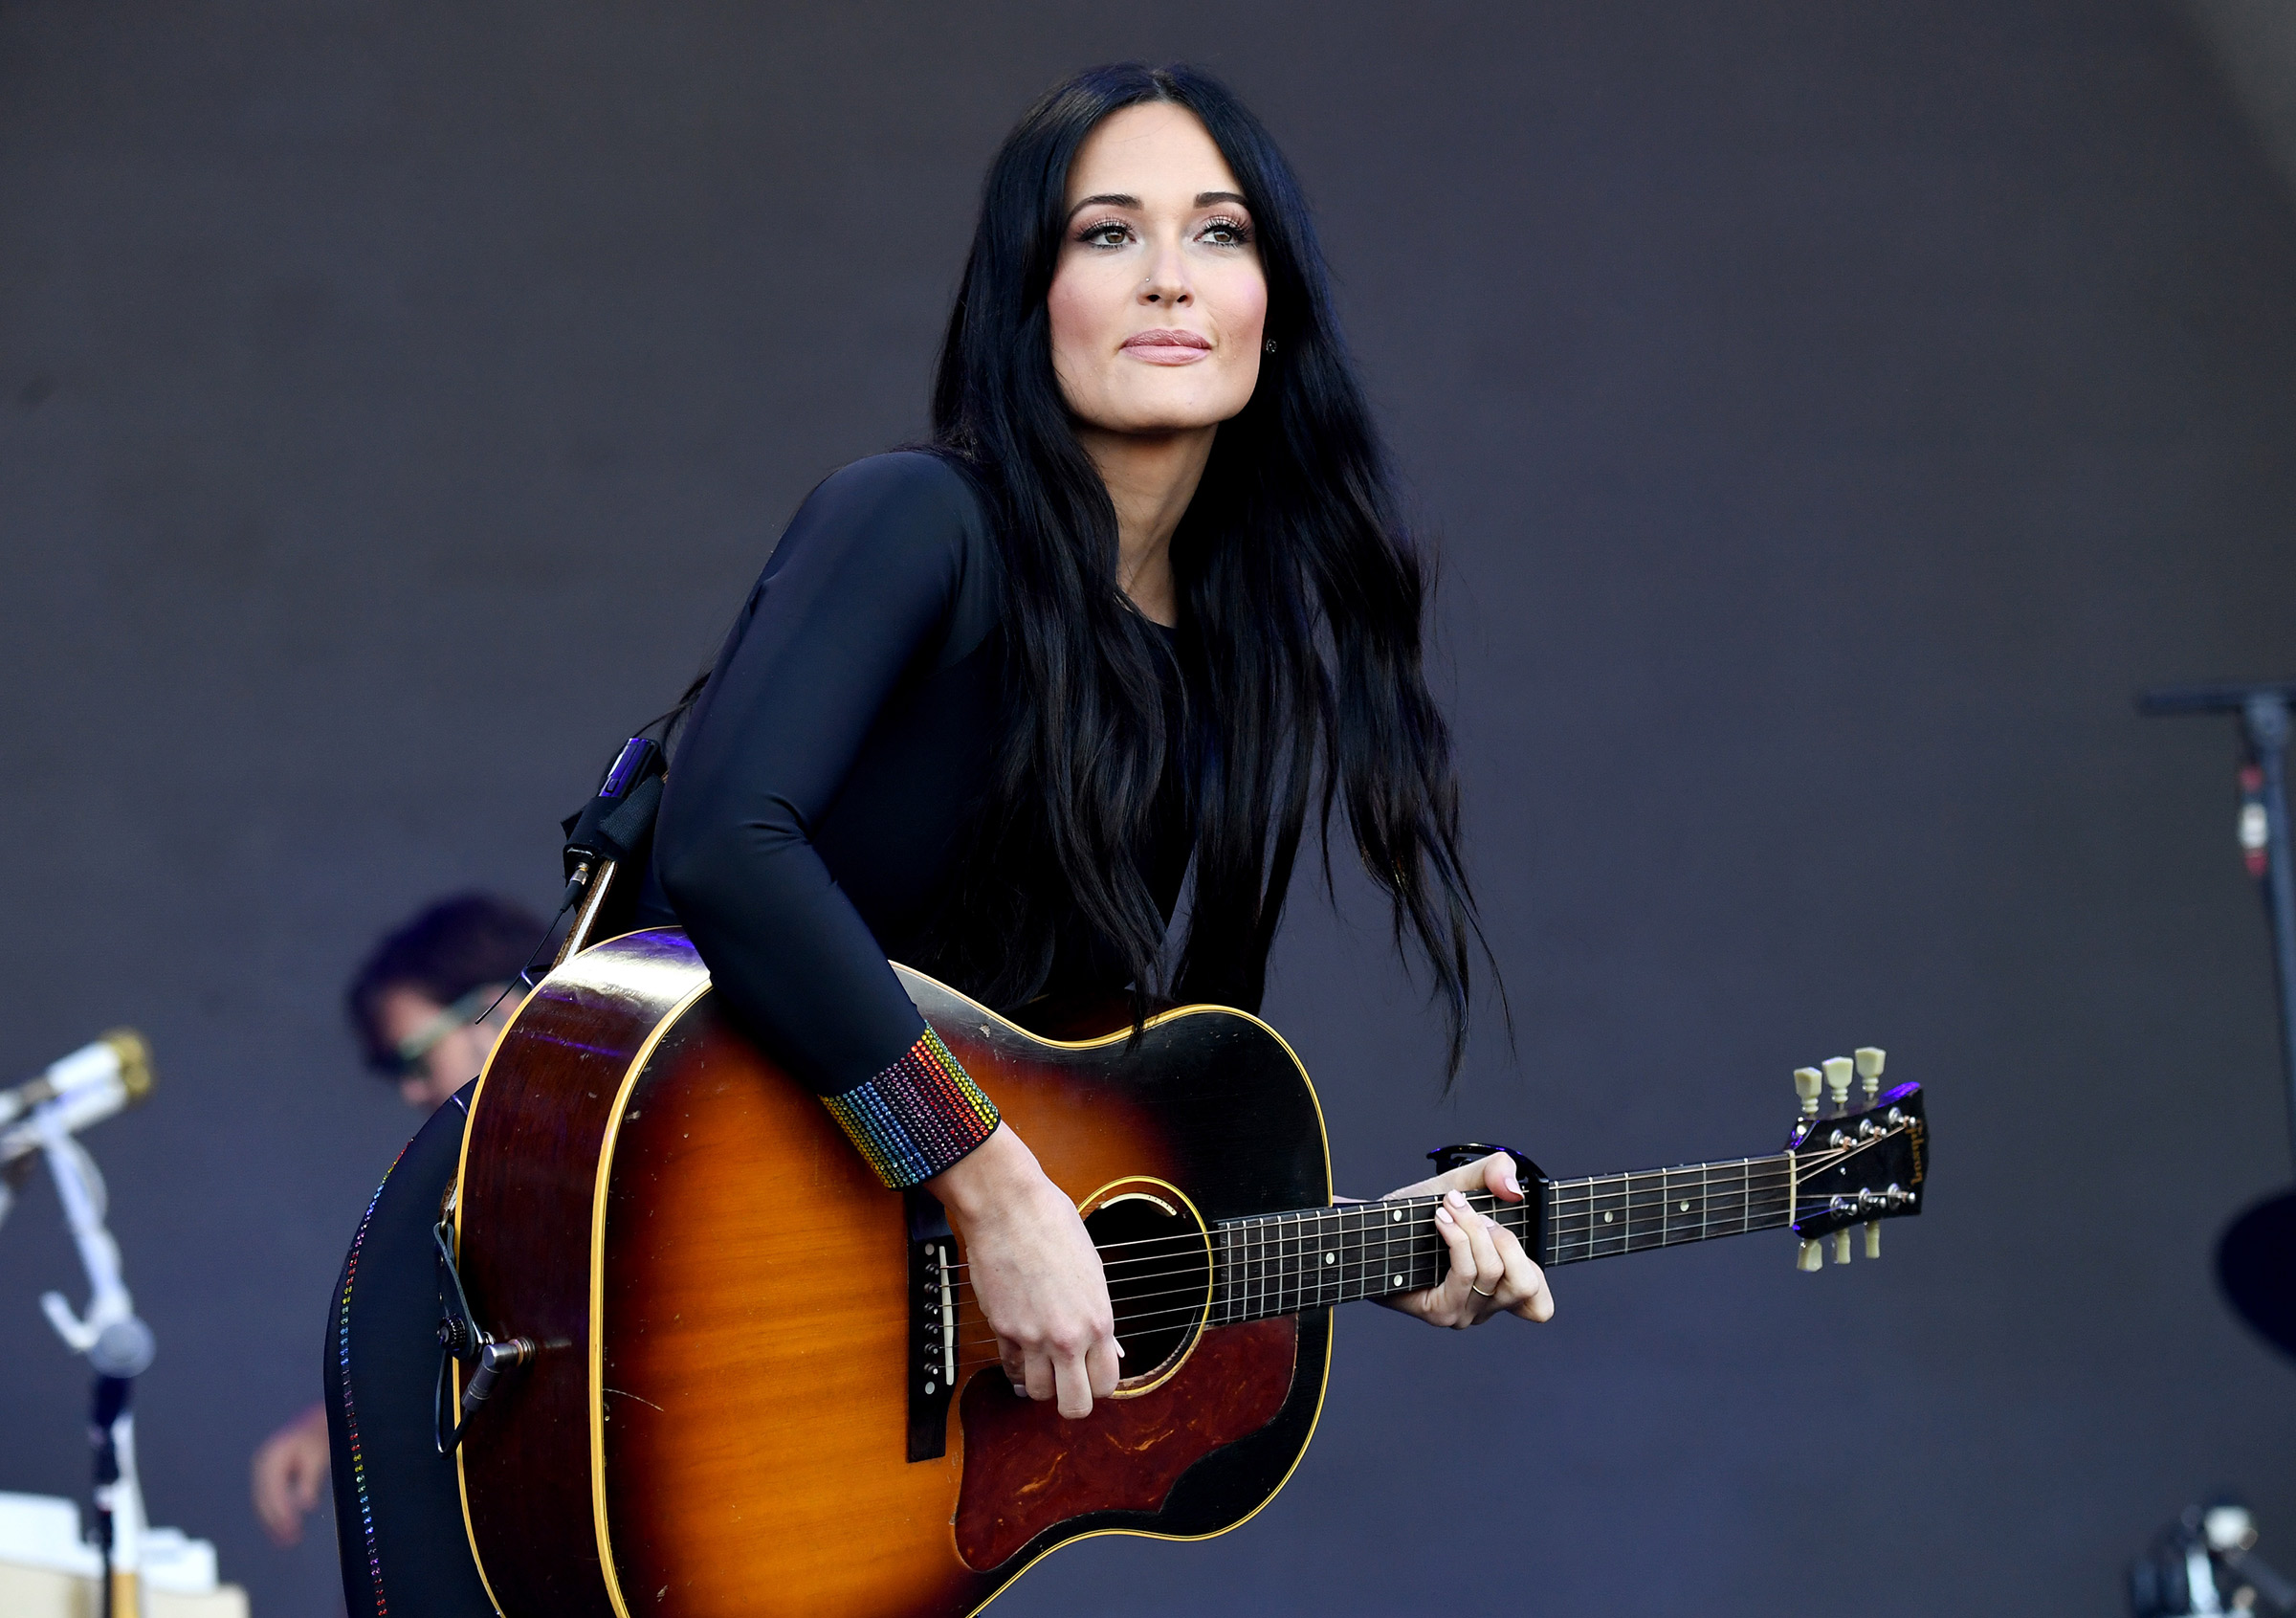 The winner of the 2019 Album of the Year Grammy Award, Musgraves has built a following without the aid of mainstream radio. (Jeff Kravitz—FilmMagic/Getty Images)